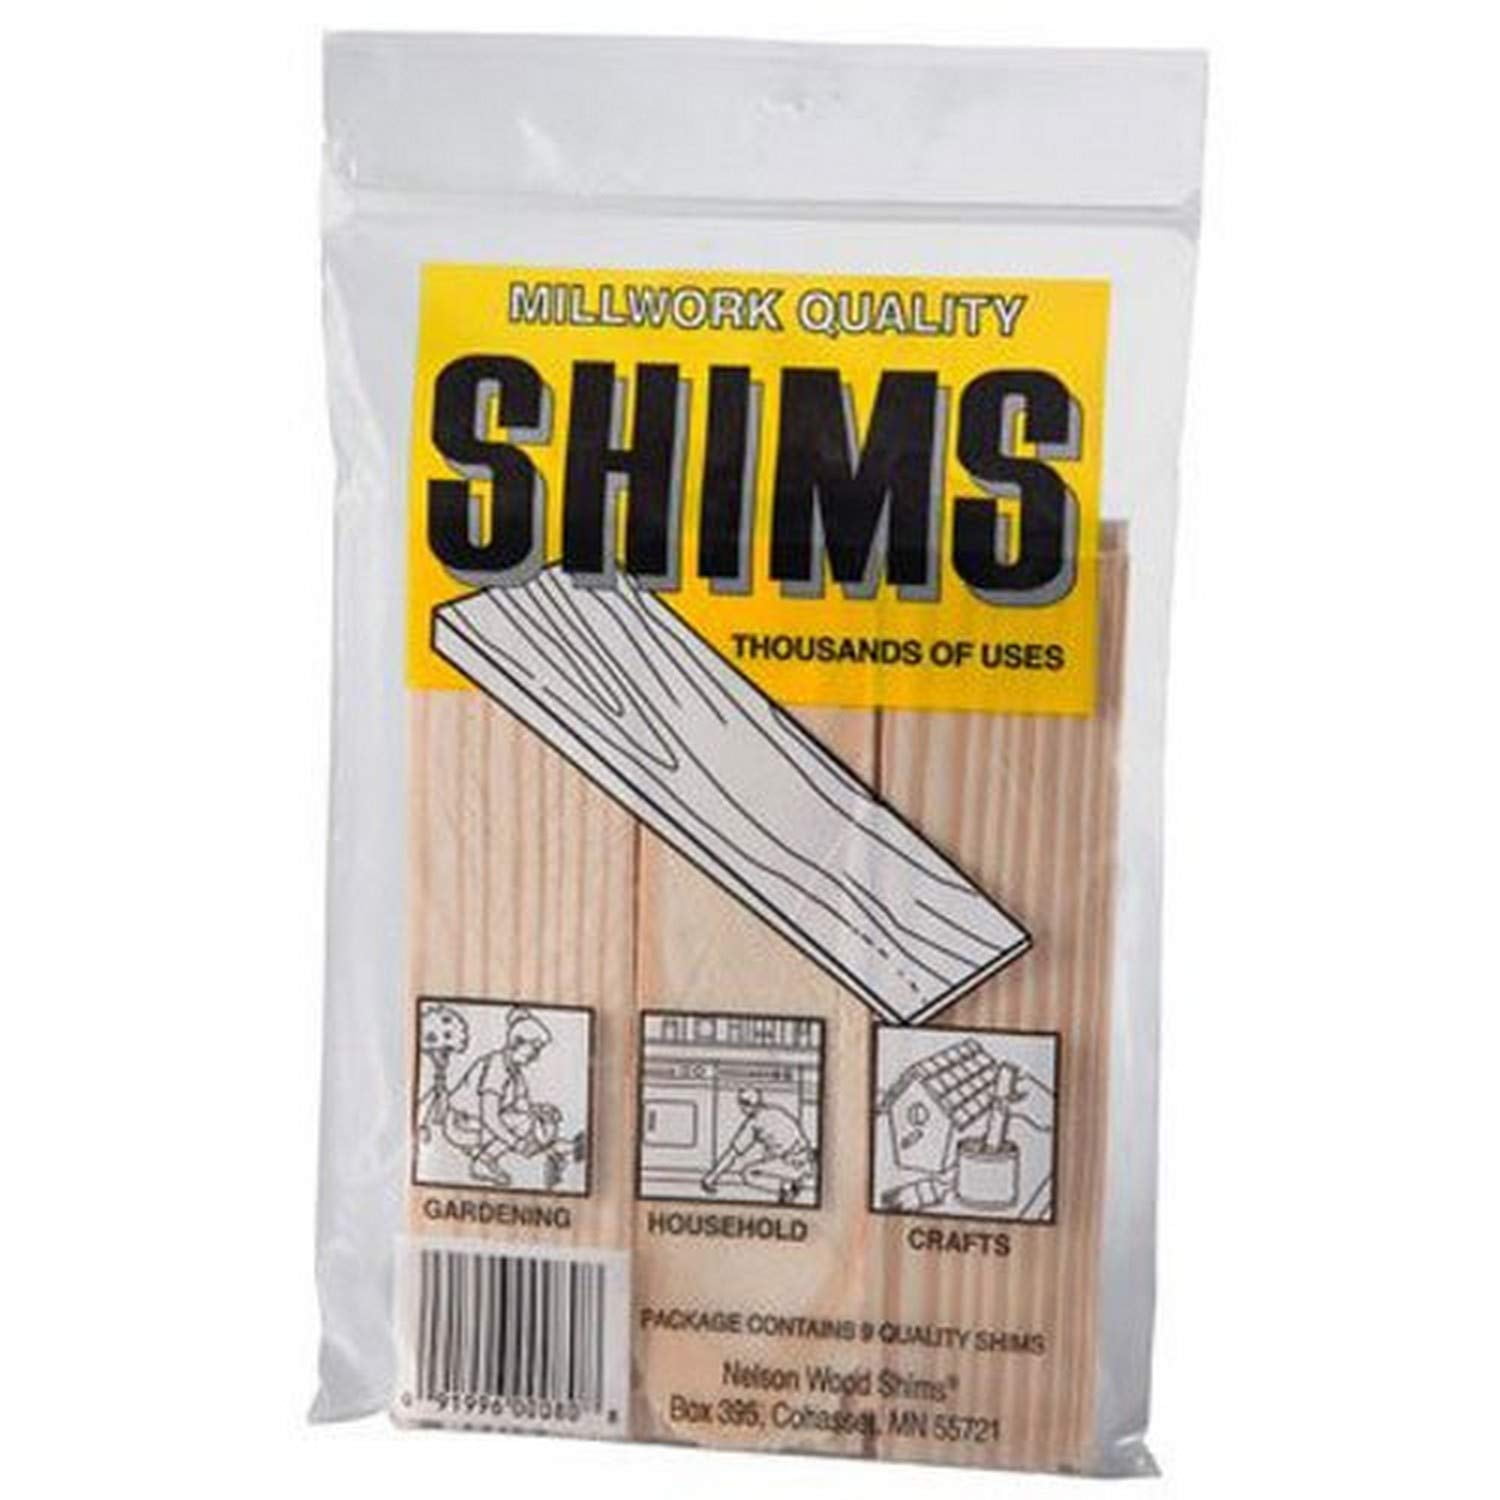 NELSON WOOD PINE SHIMS 120 SHIMS PER BOX GR8 FOR HEAVY ITEMS NW 120 PINE 